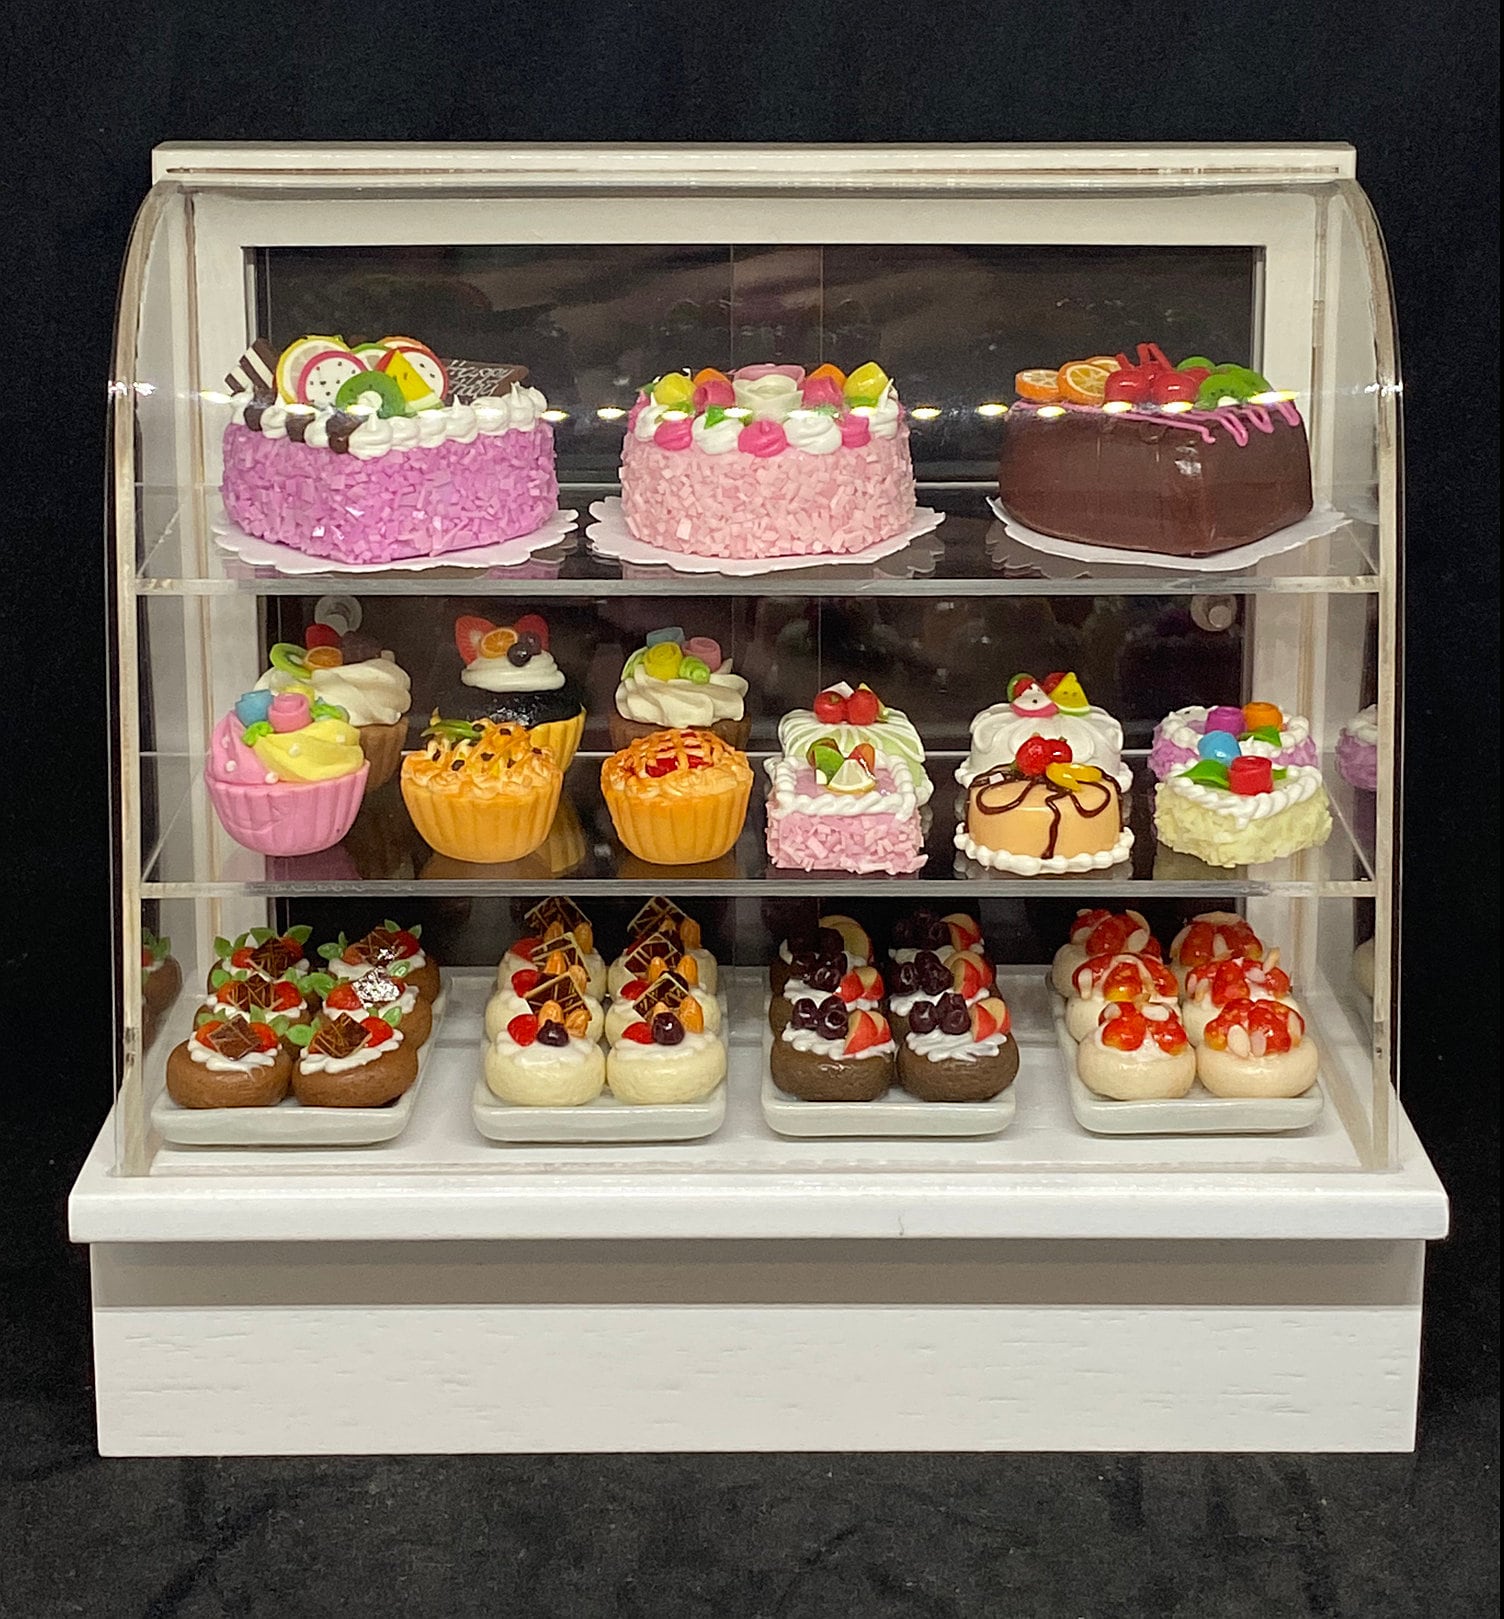 CAKE DISPLAY SHOWCASE REFRIGERATED 4FT SS BODY - Restaurant.Store